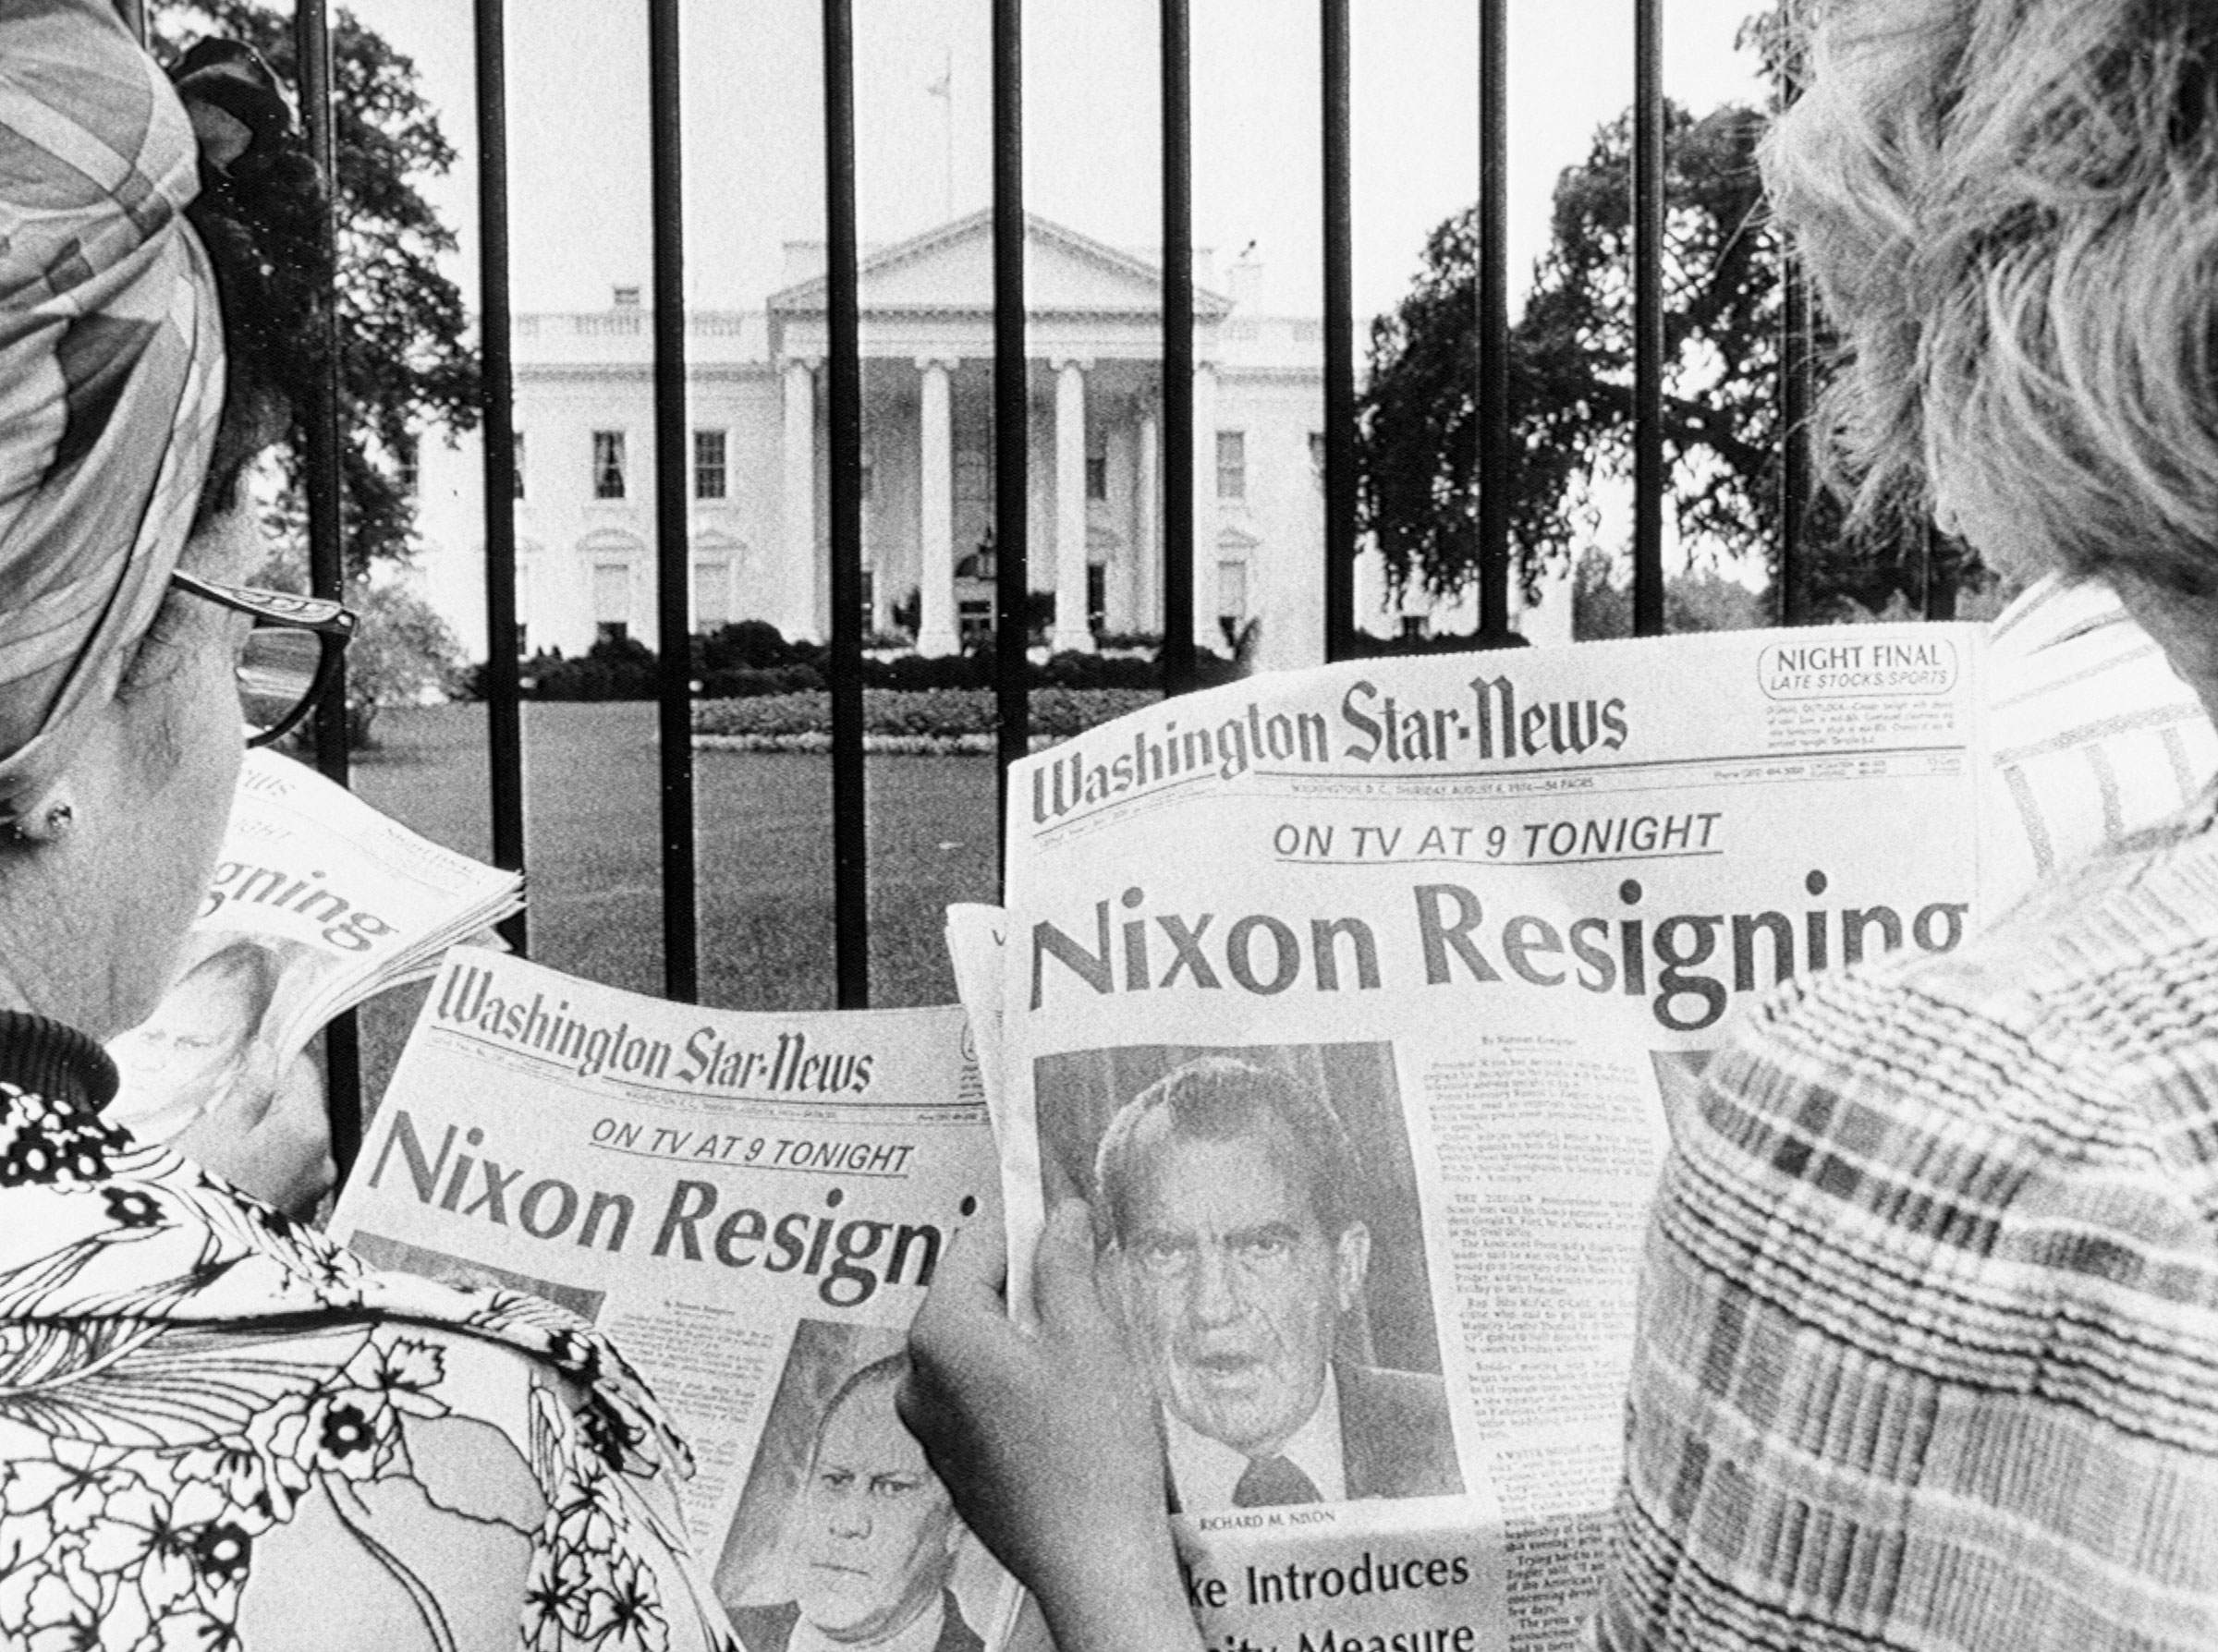 Newspaper headlines being read by tourists in front of the White House on Aug. 8, 1974. (Bettmann Archive/Getty Images)